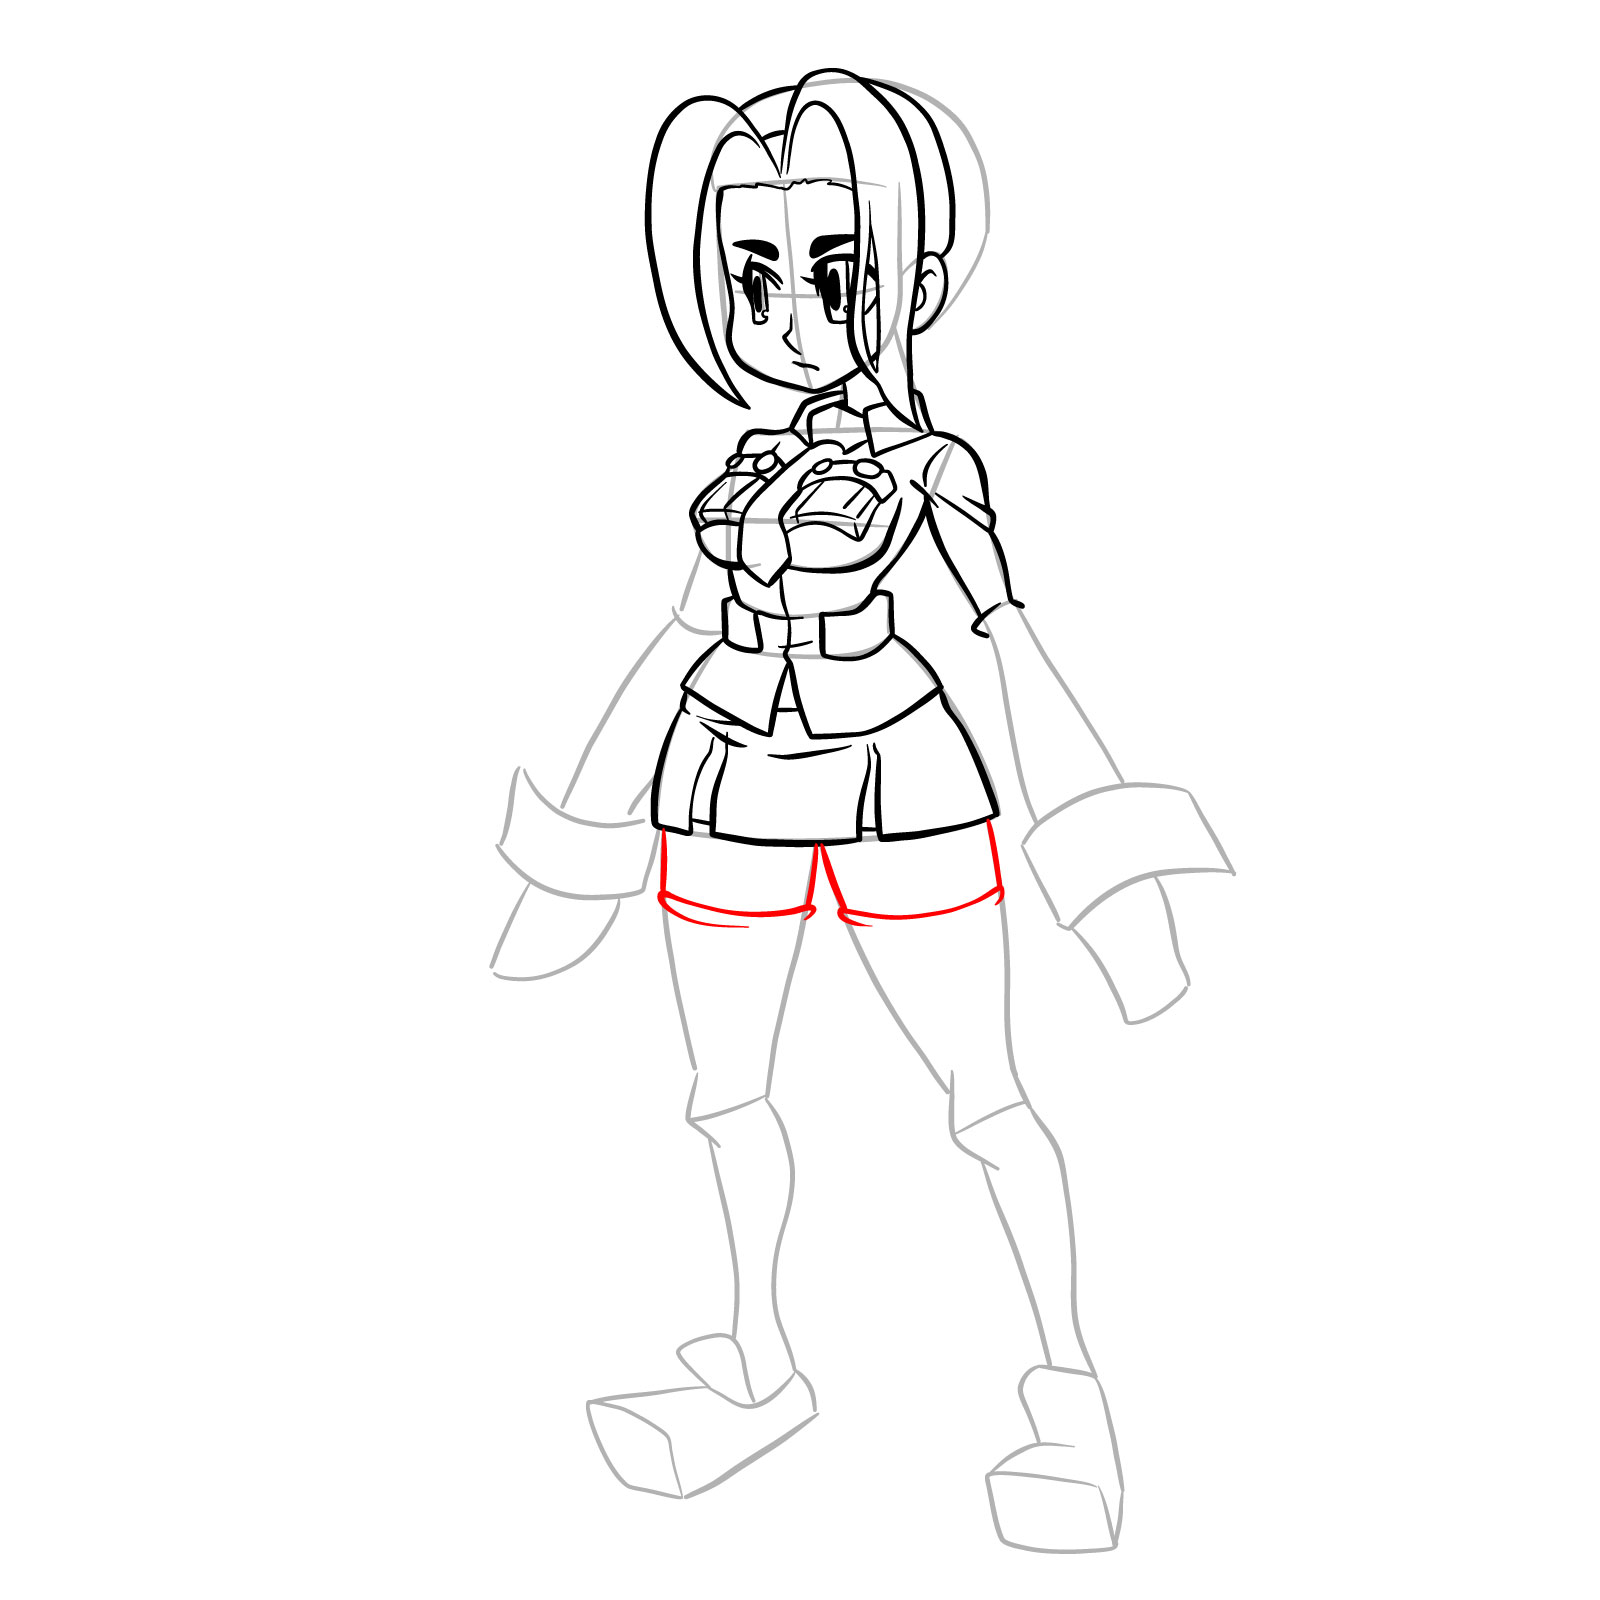 How to draw Filia from Skullgirls - step 26